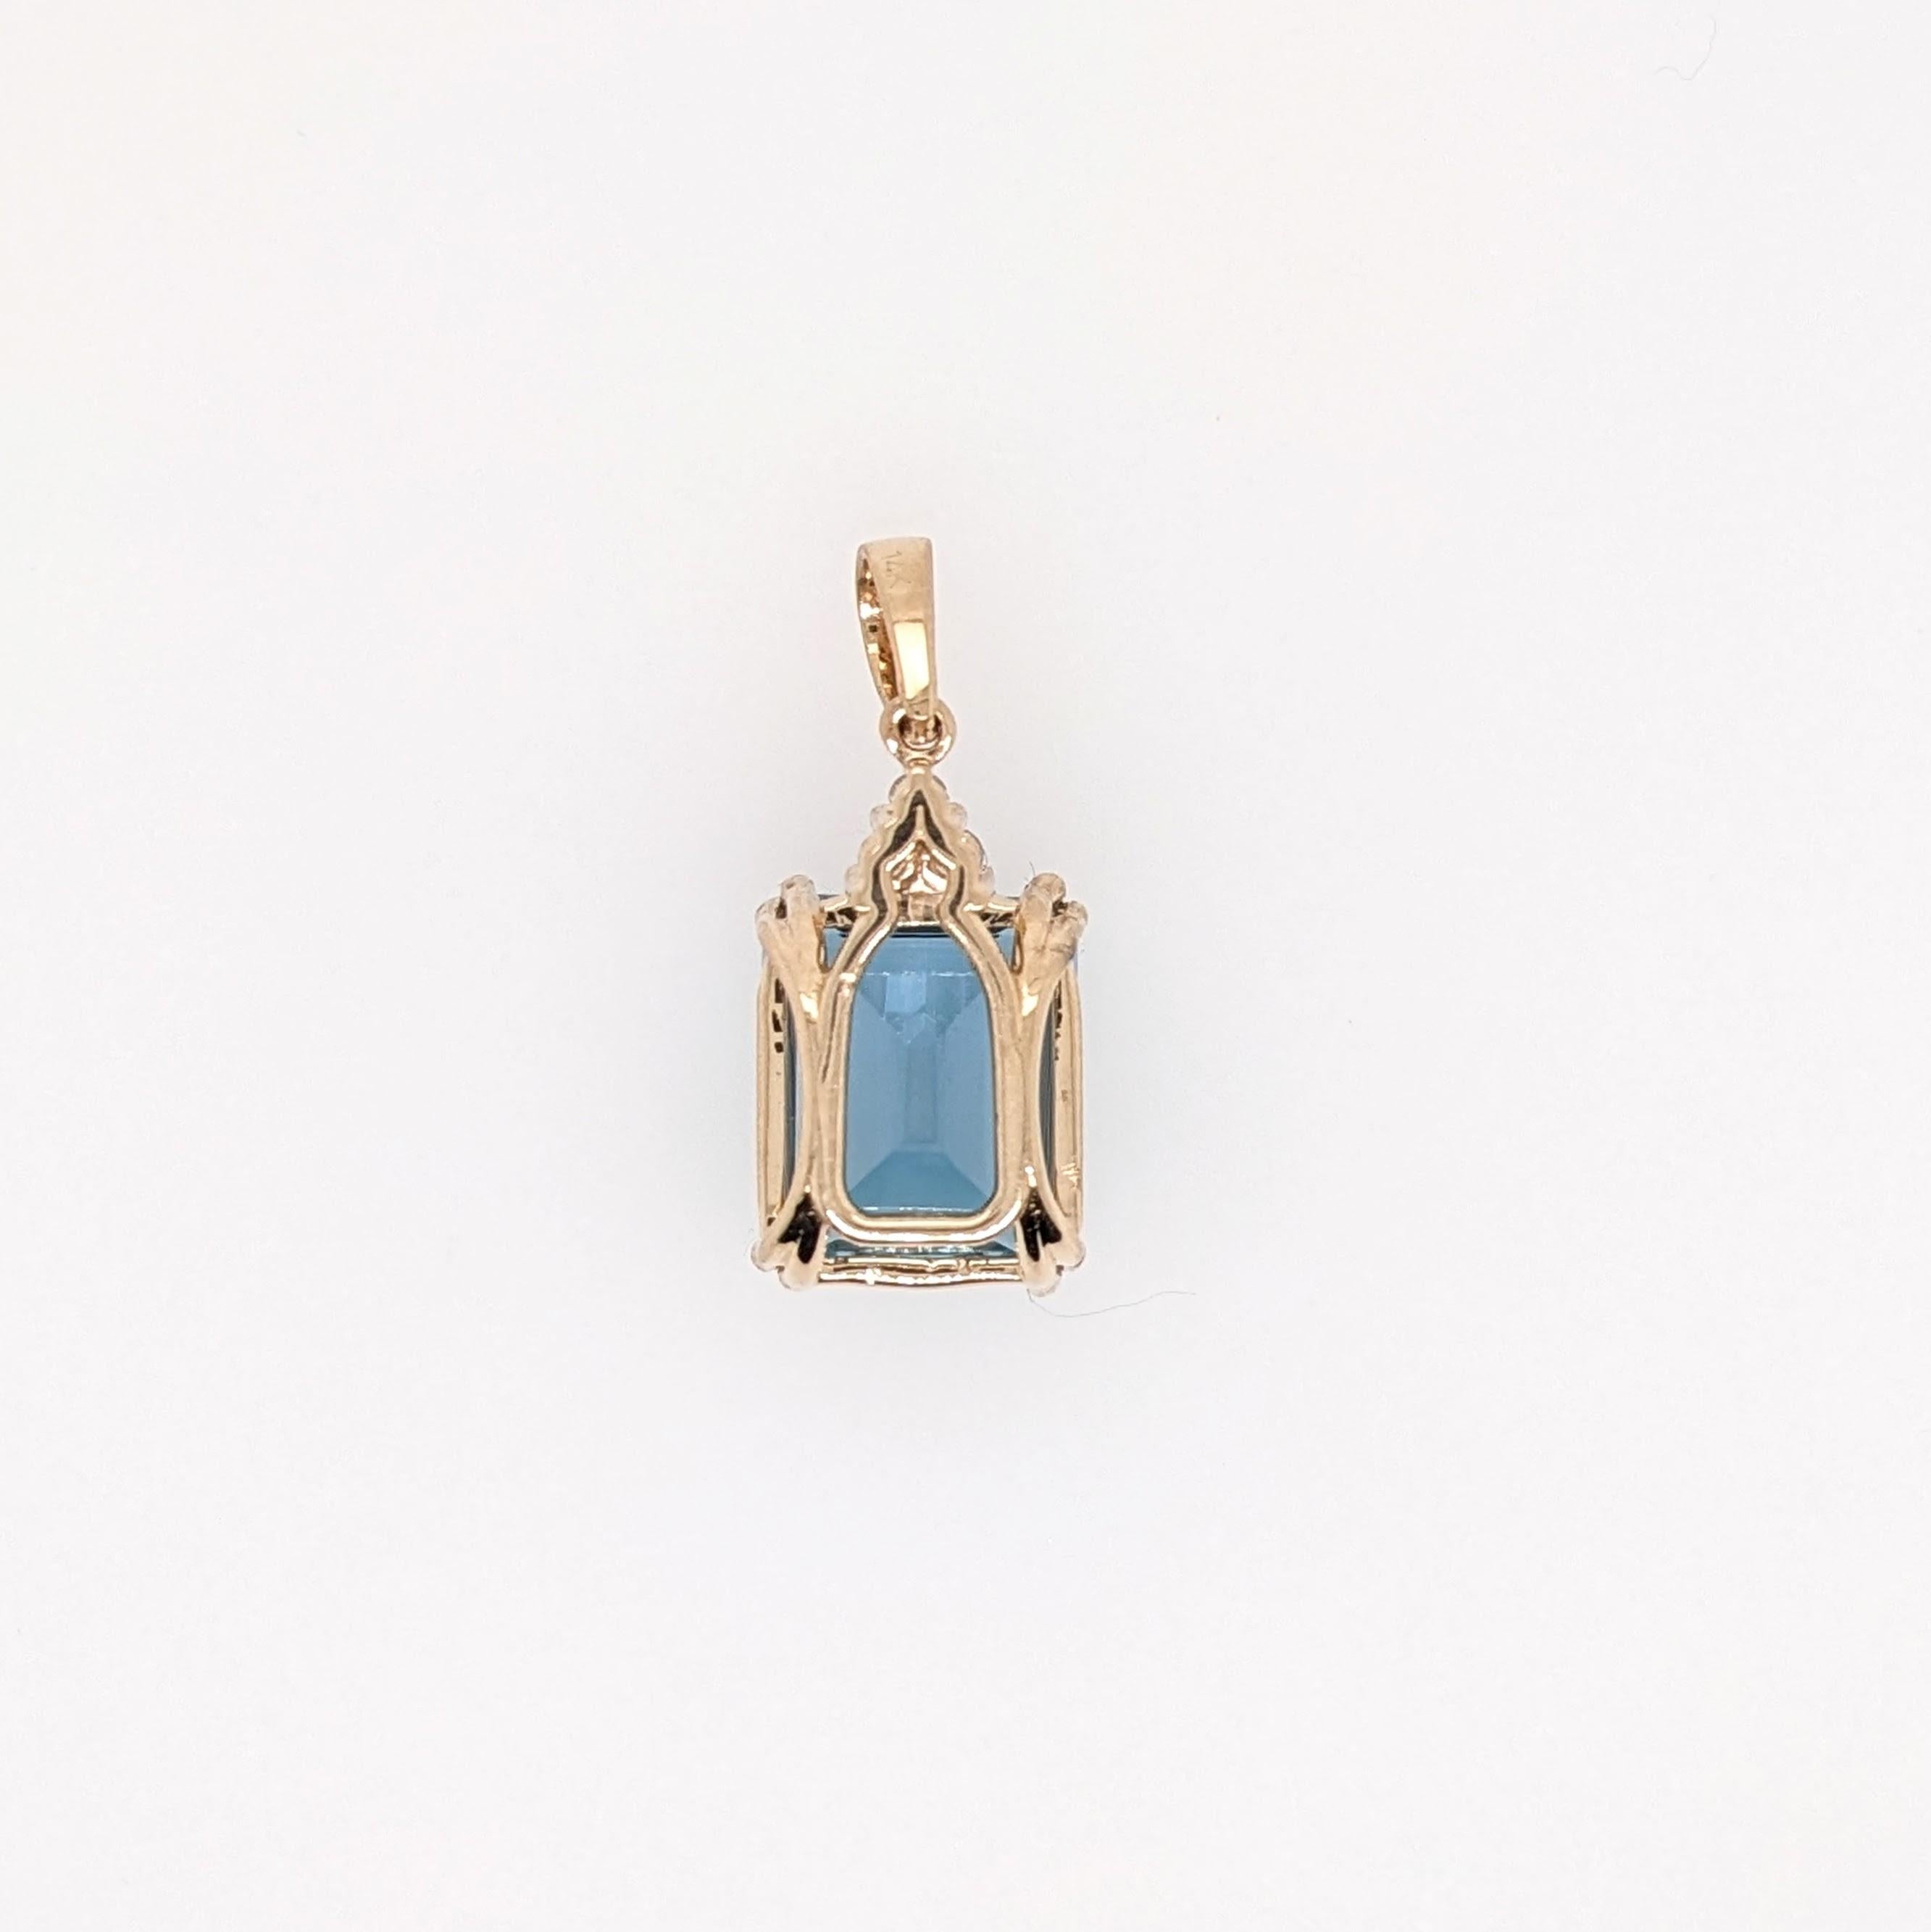 This London Blue Topaz pendant features a gorgeous unique shade of vibrant blue and beautiful clarity with an amazing sparkle. This pendant makes a stunning statement piece made in 14k yellow gold that will elevate any outfit!

Specifications

Item